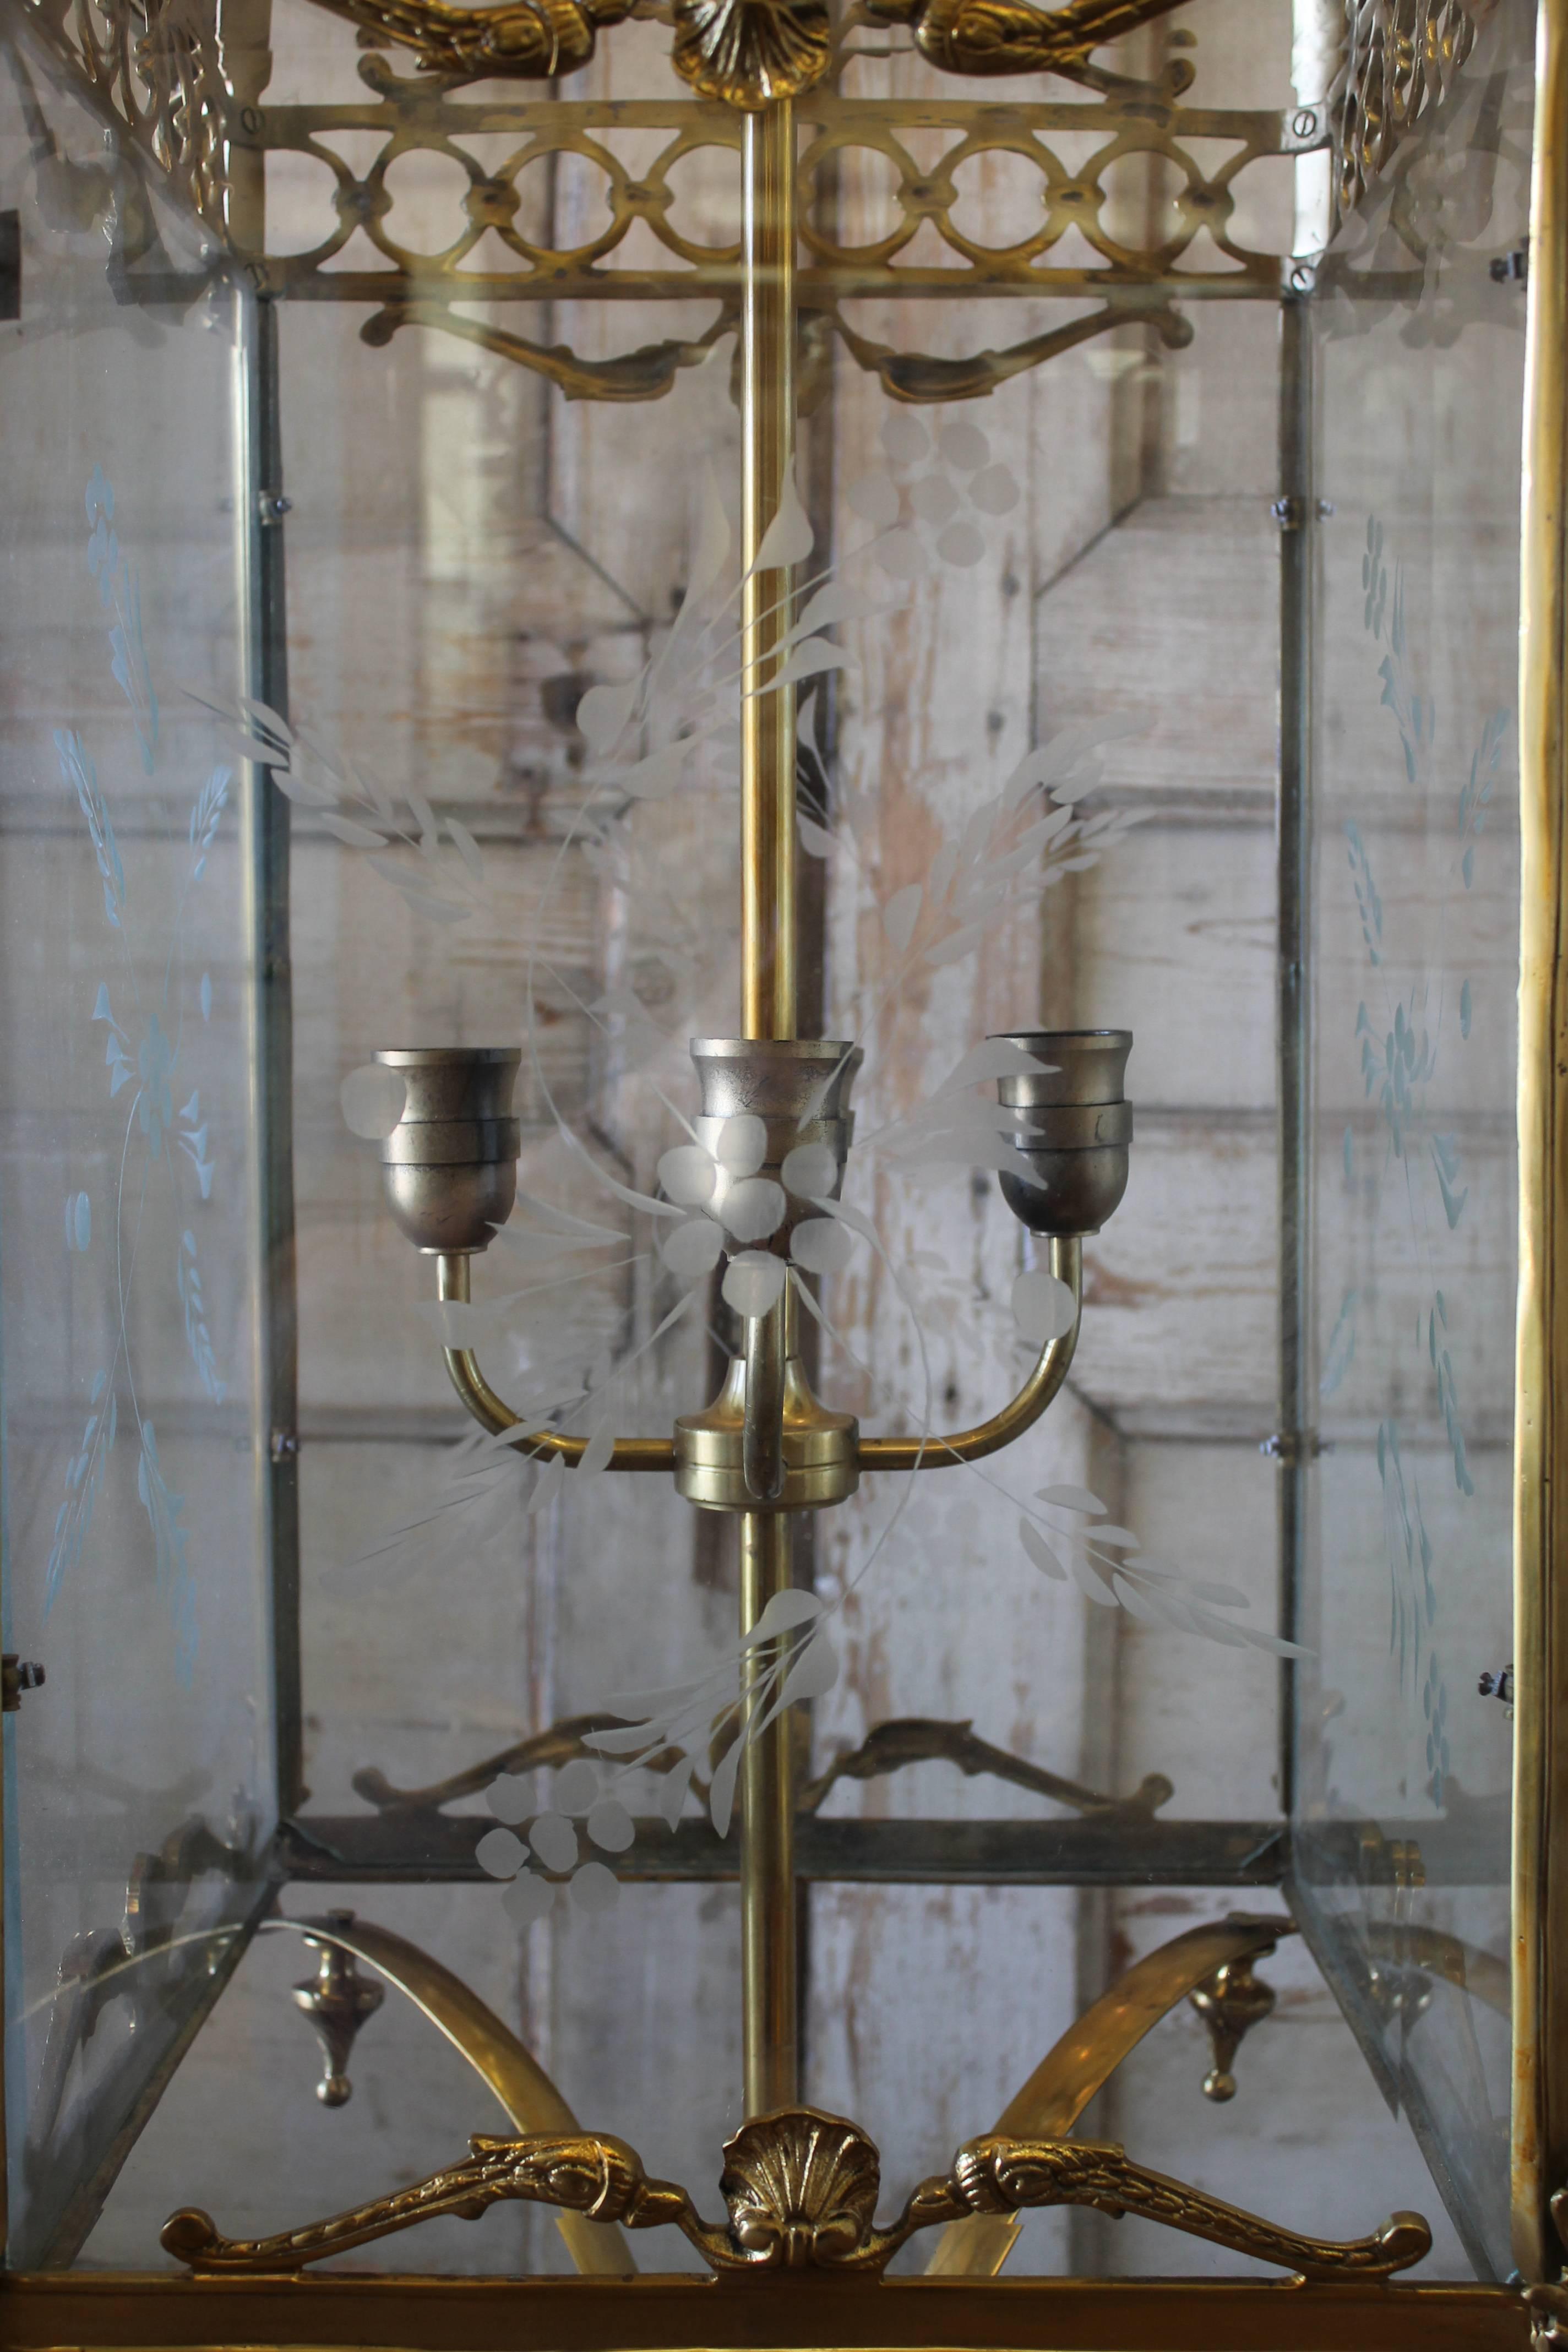 20th Century English Gilt Bronze Lantern Lights with Etched Glass